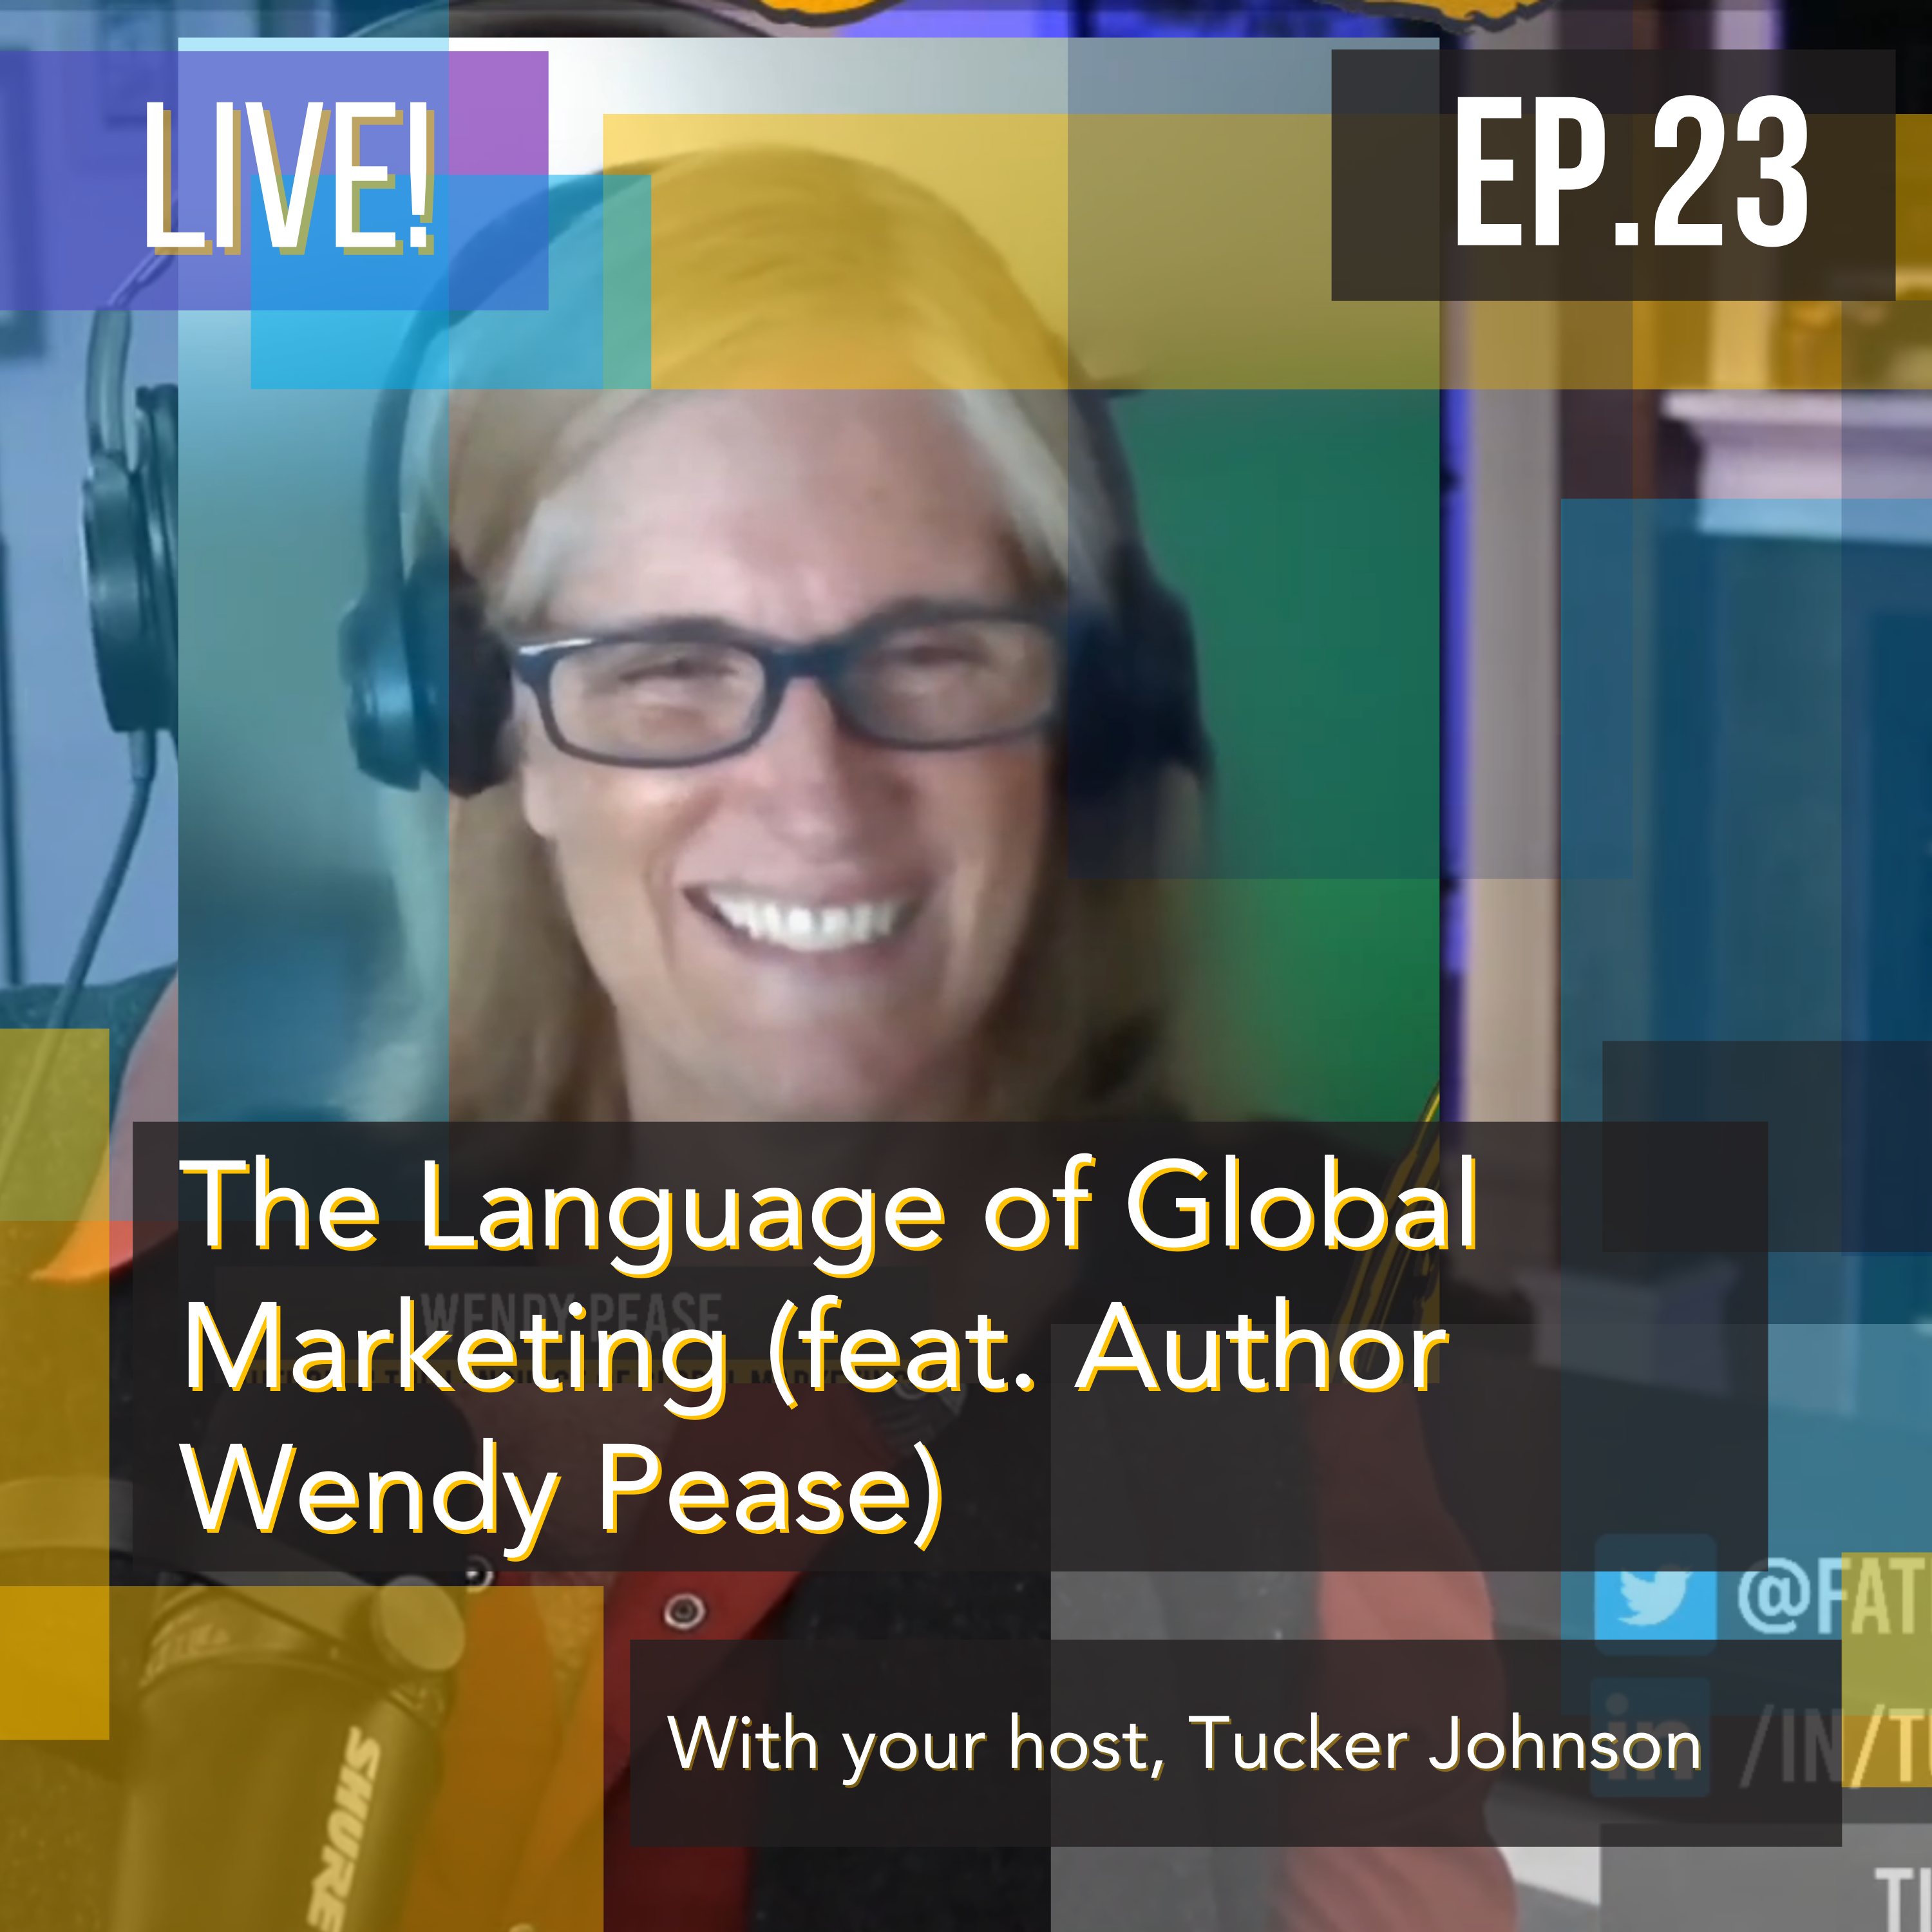 The Language of Global Marketing (feat. Author Wendy Pease)